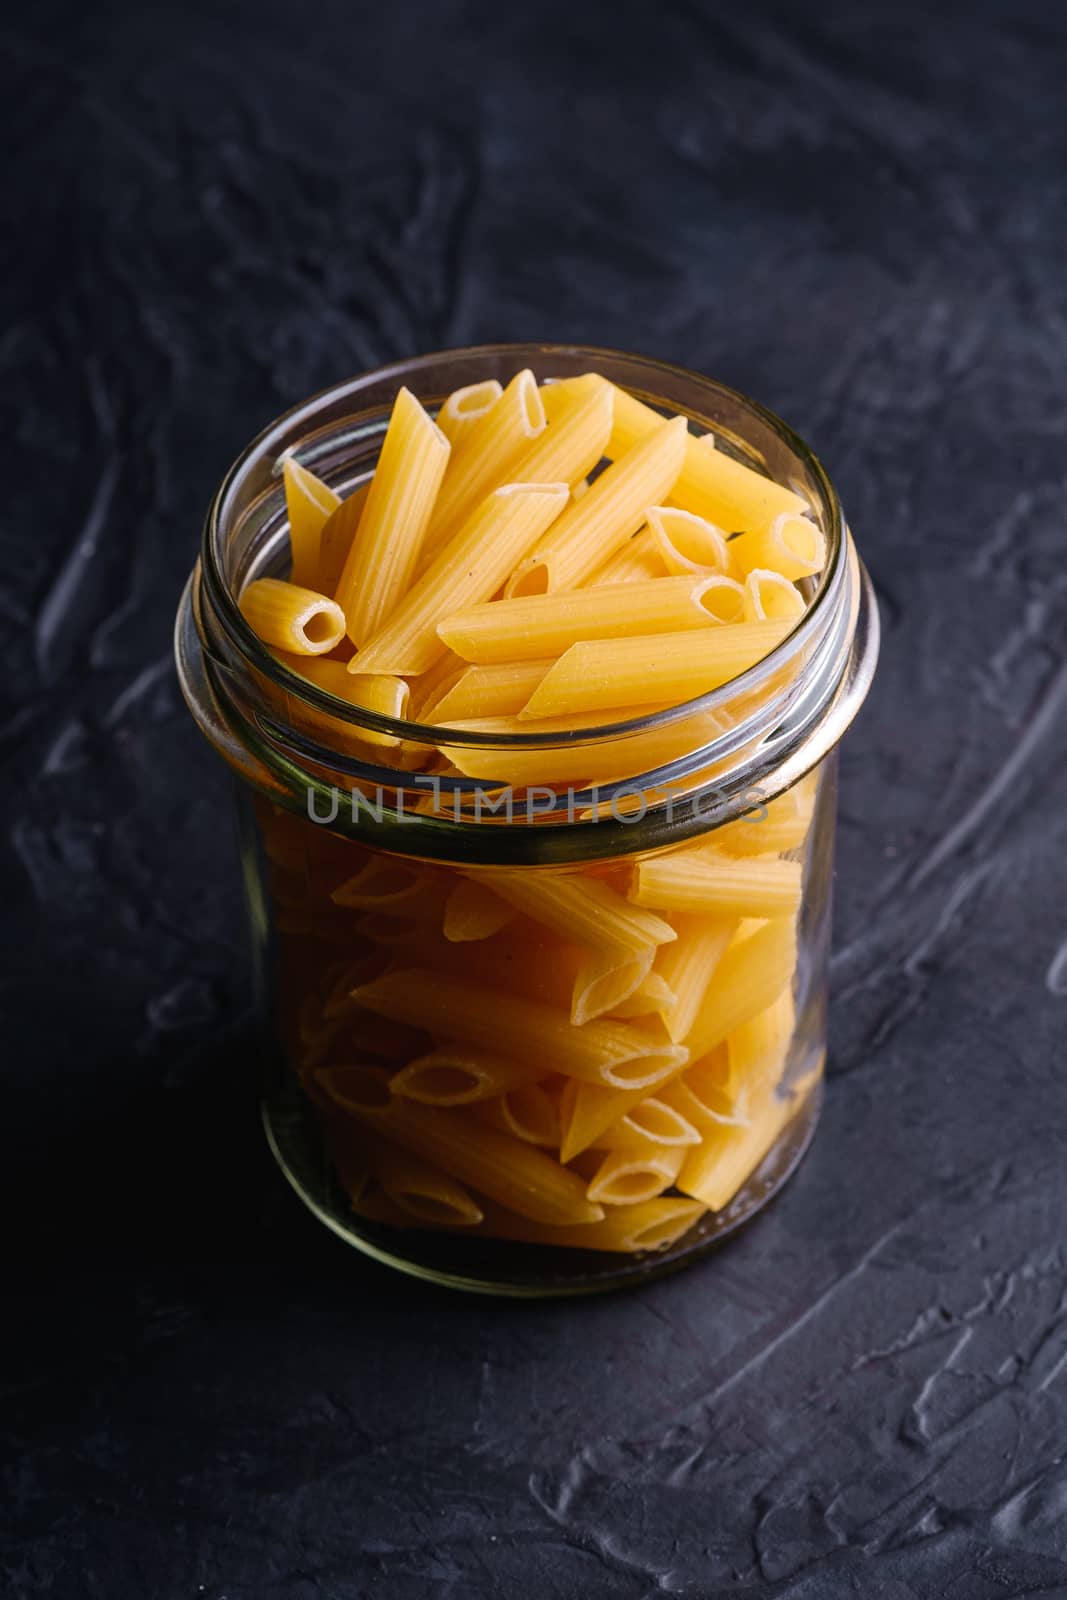 One glass jar with penne uncooked golden wheat tube pasta on textured dark black background, angle view